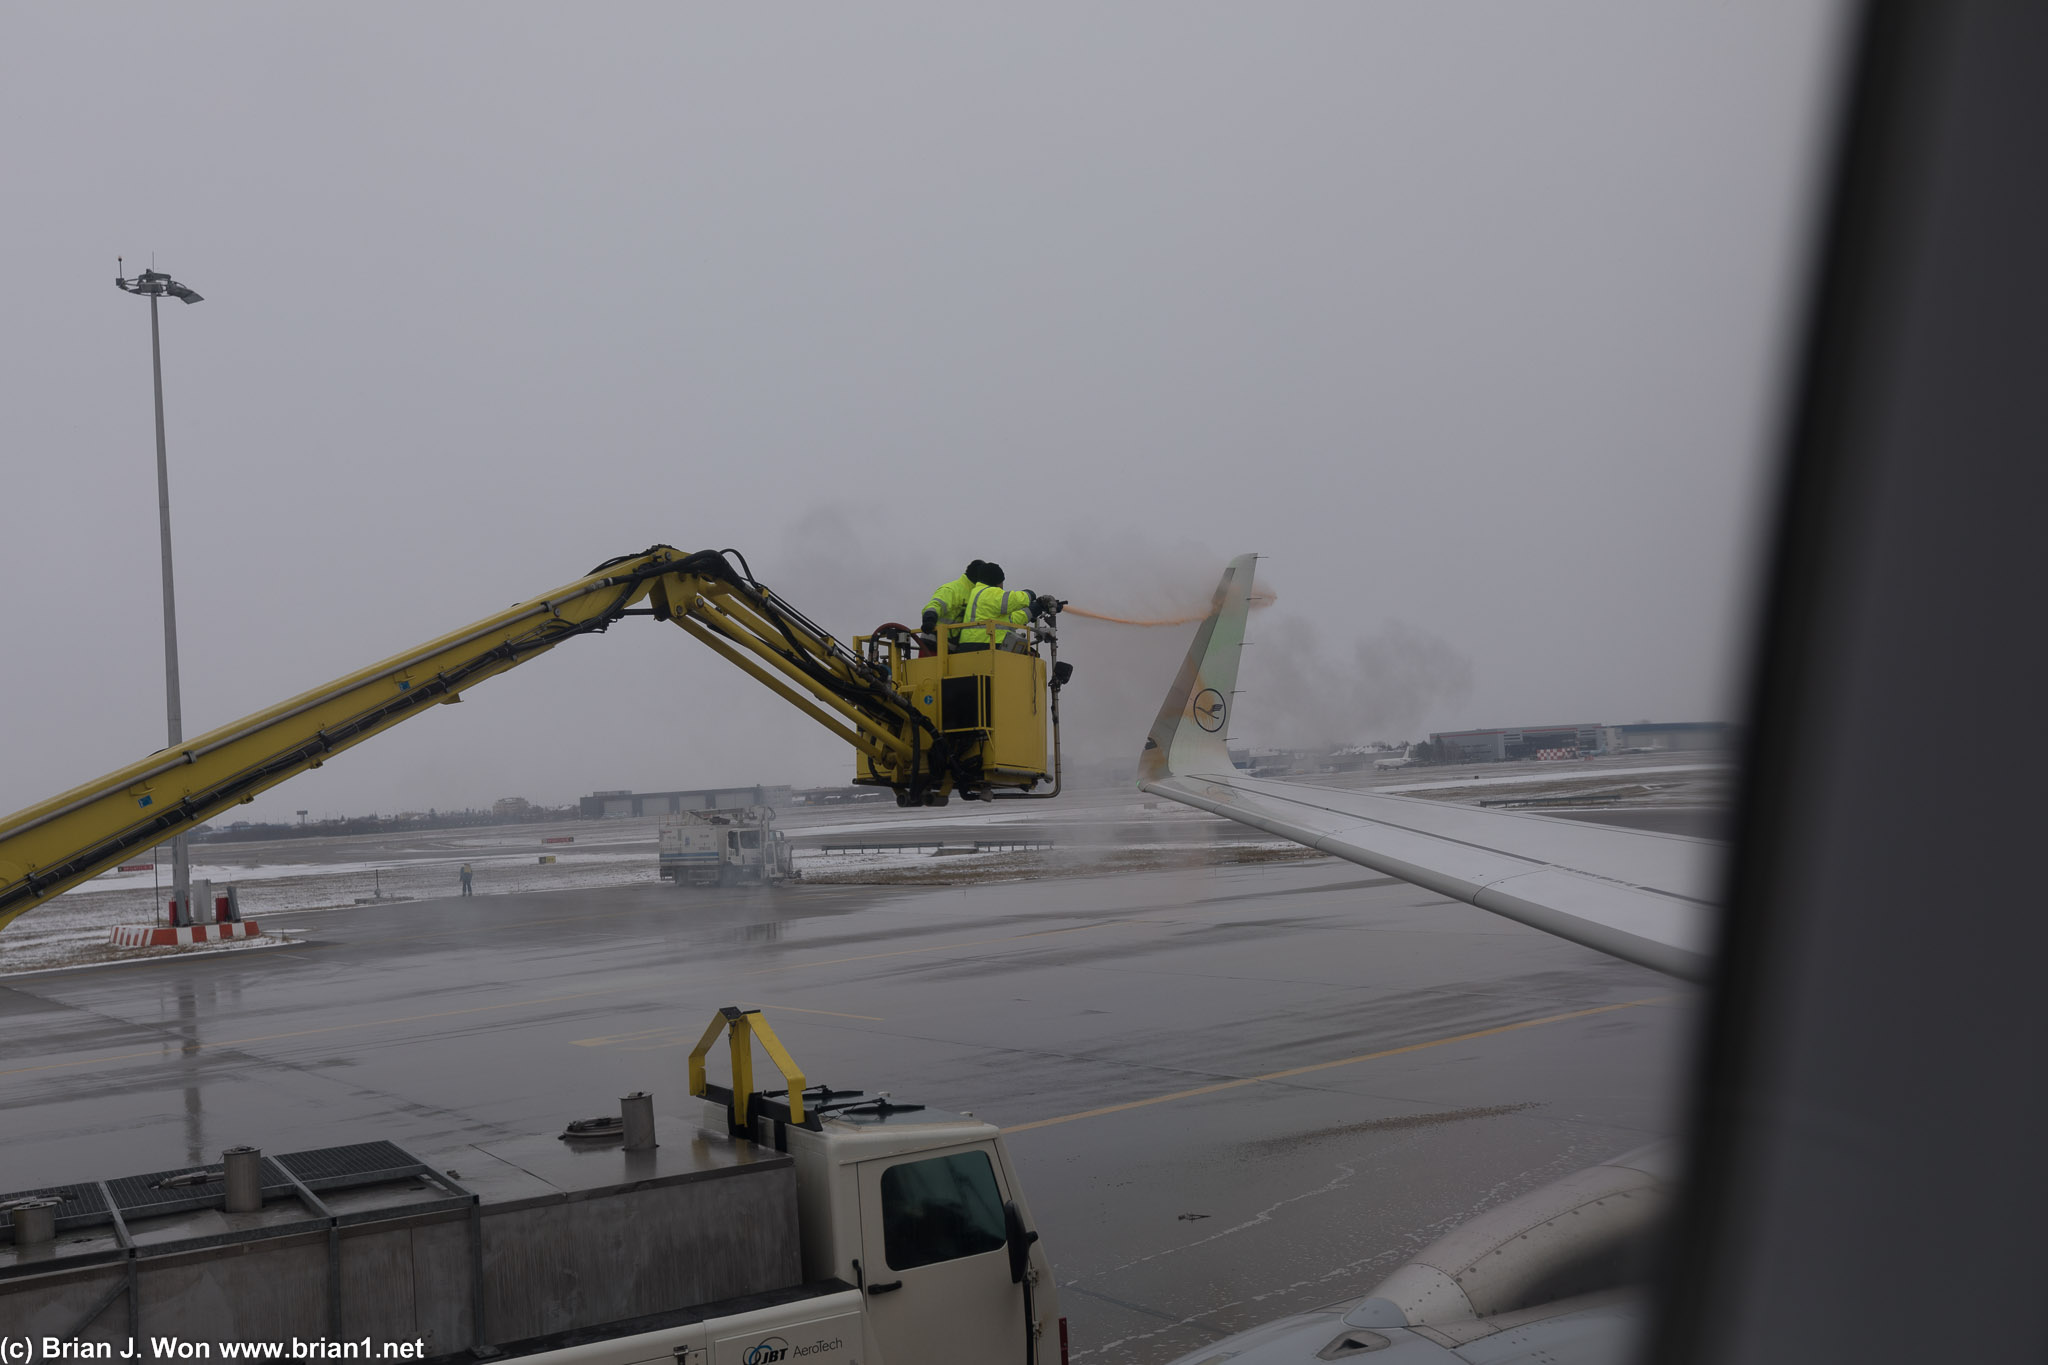 De-icing the plane before takeoff.